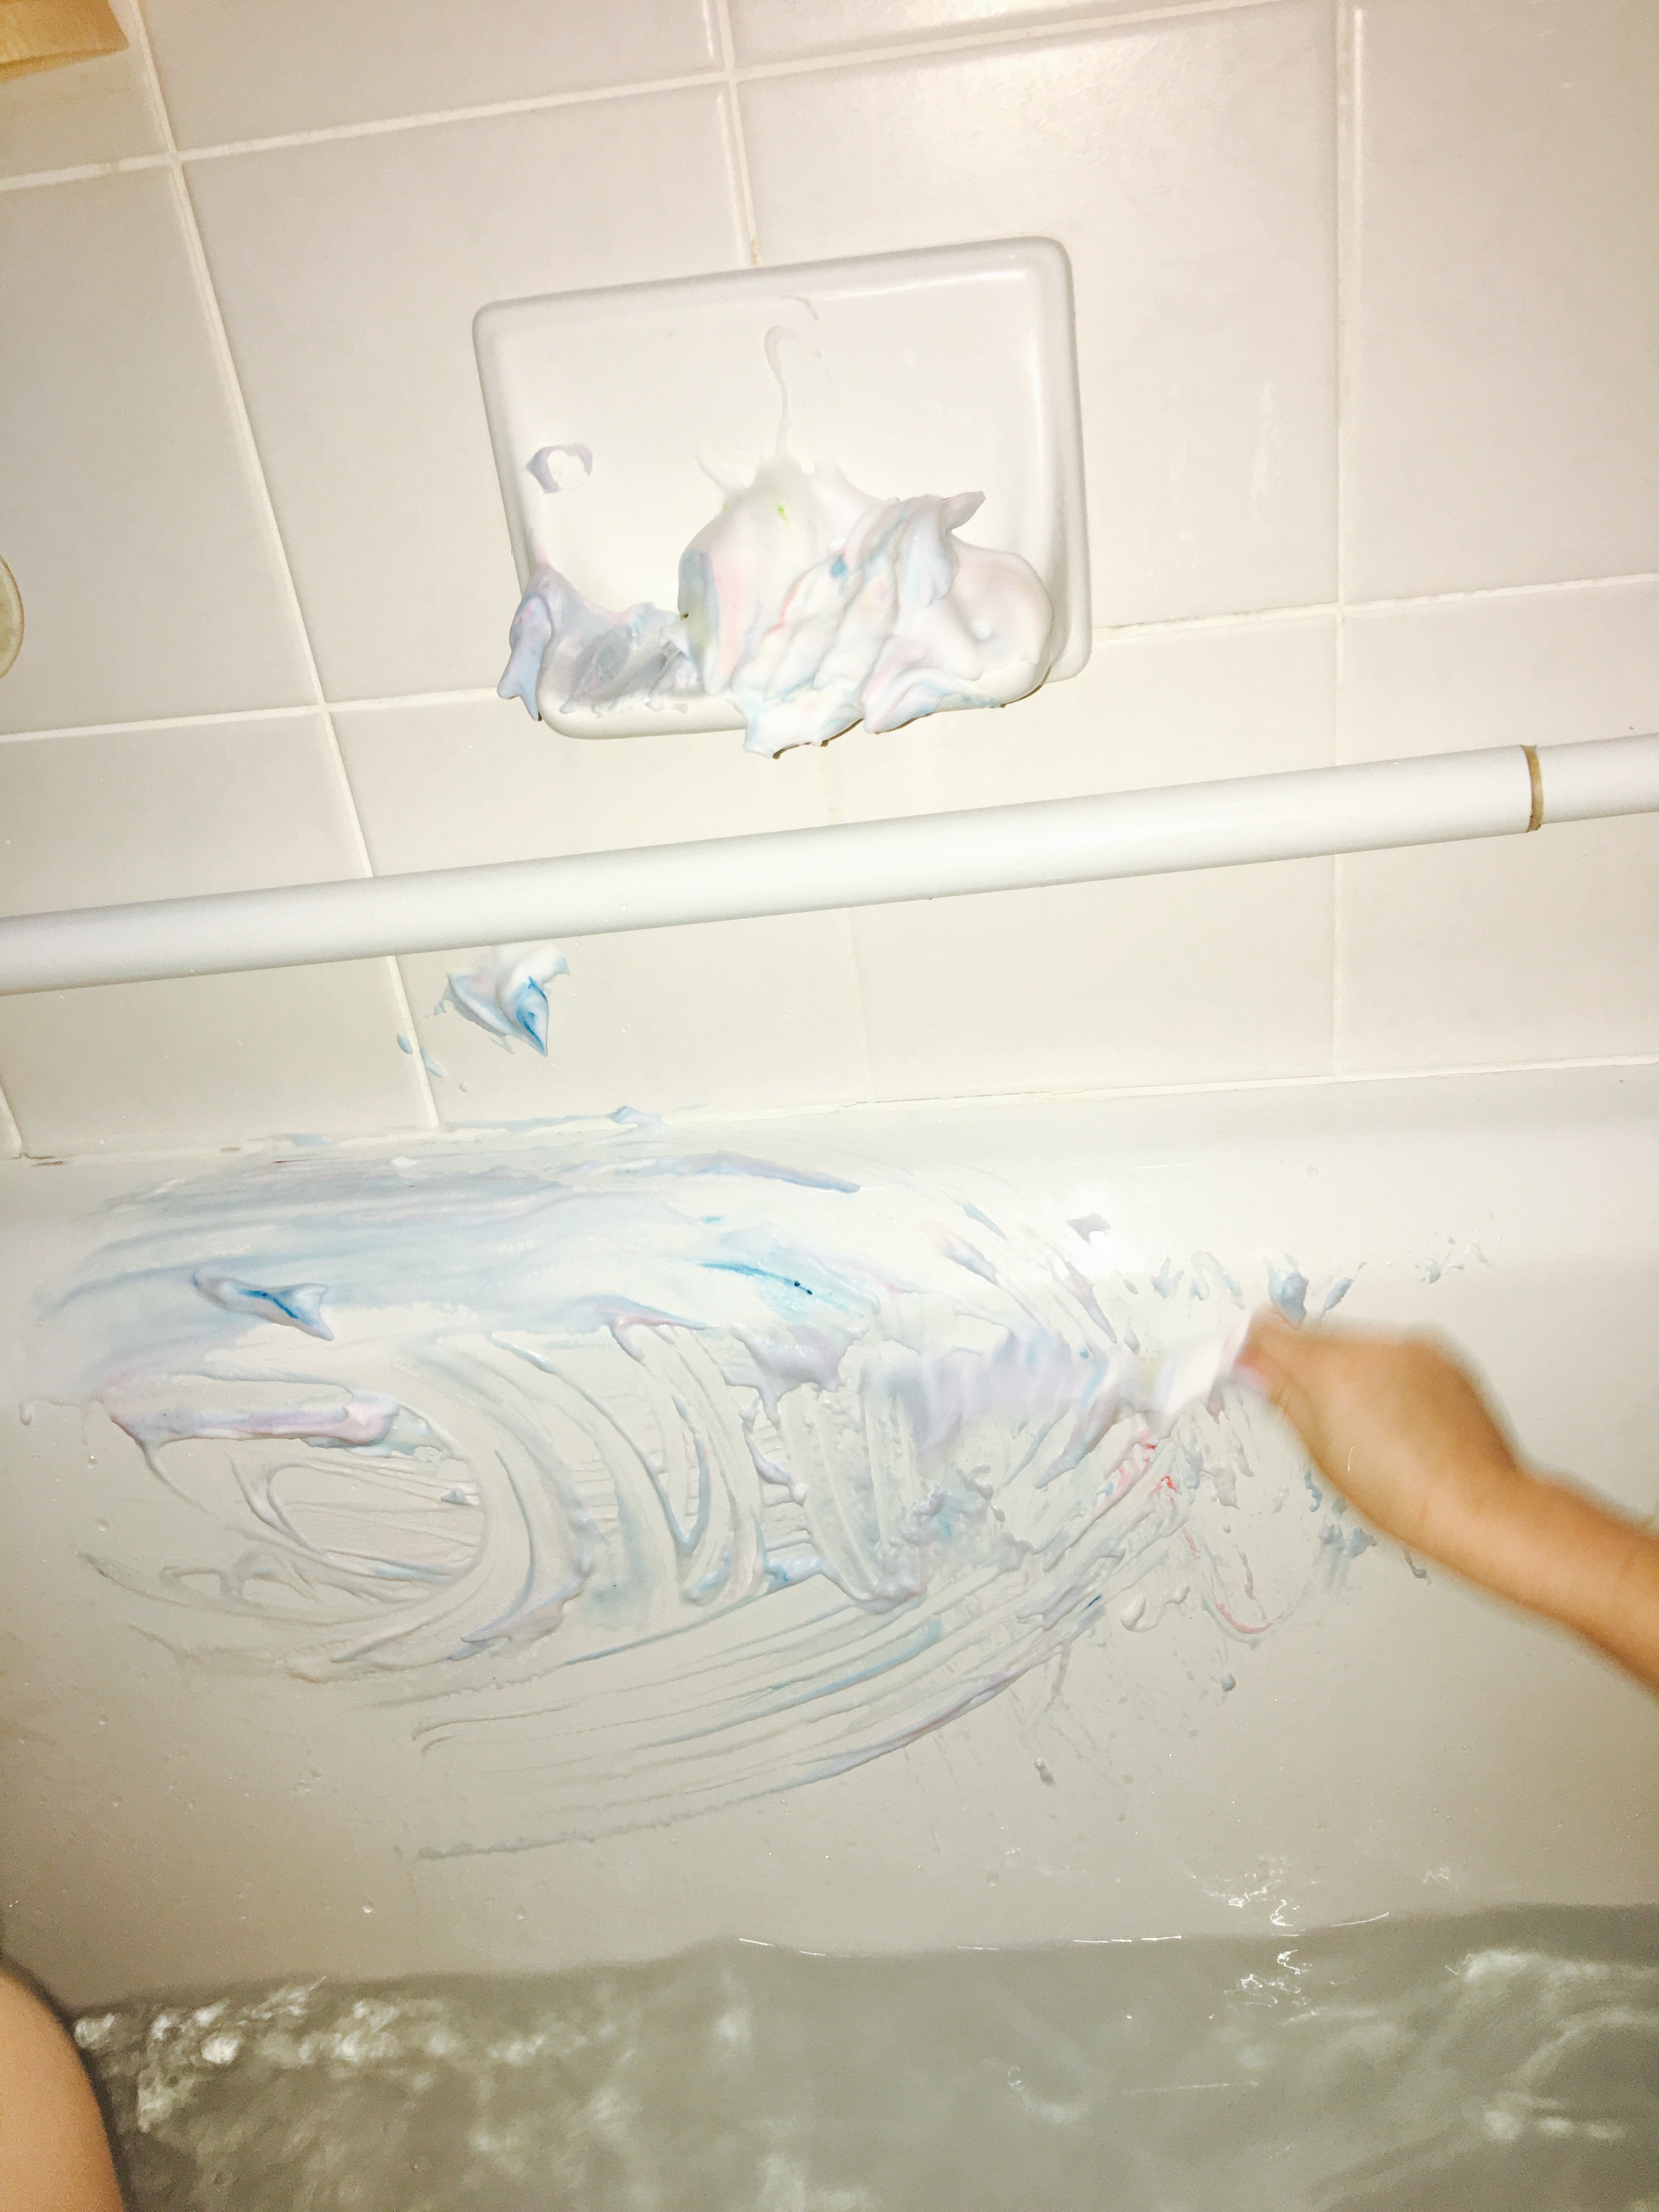 Learning about clouds and rainbows is fun when you use shaving cream. Easy clean-up: let them play in the bathtub then wash!